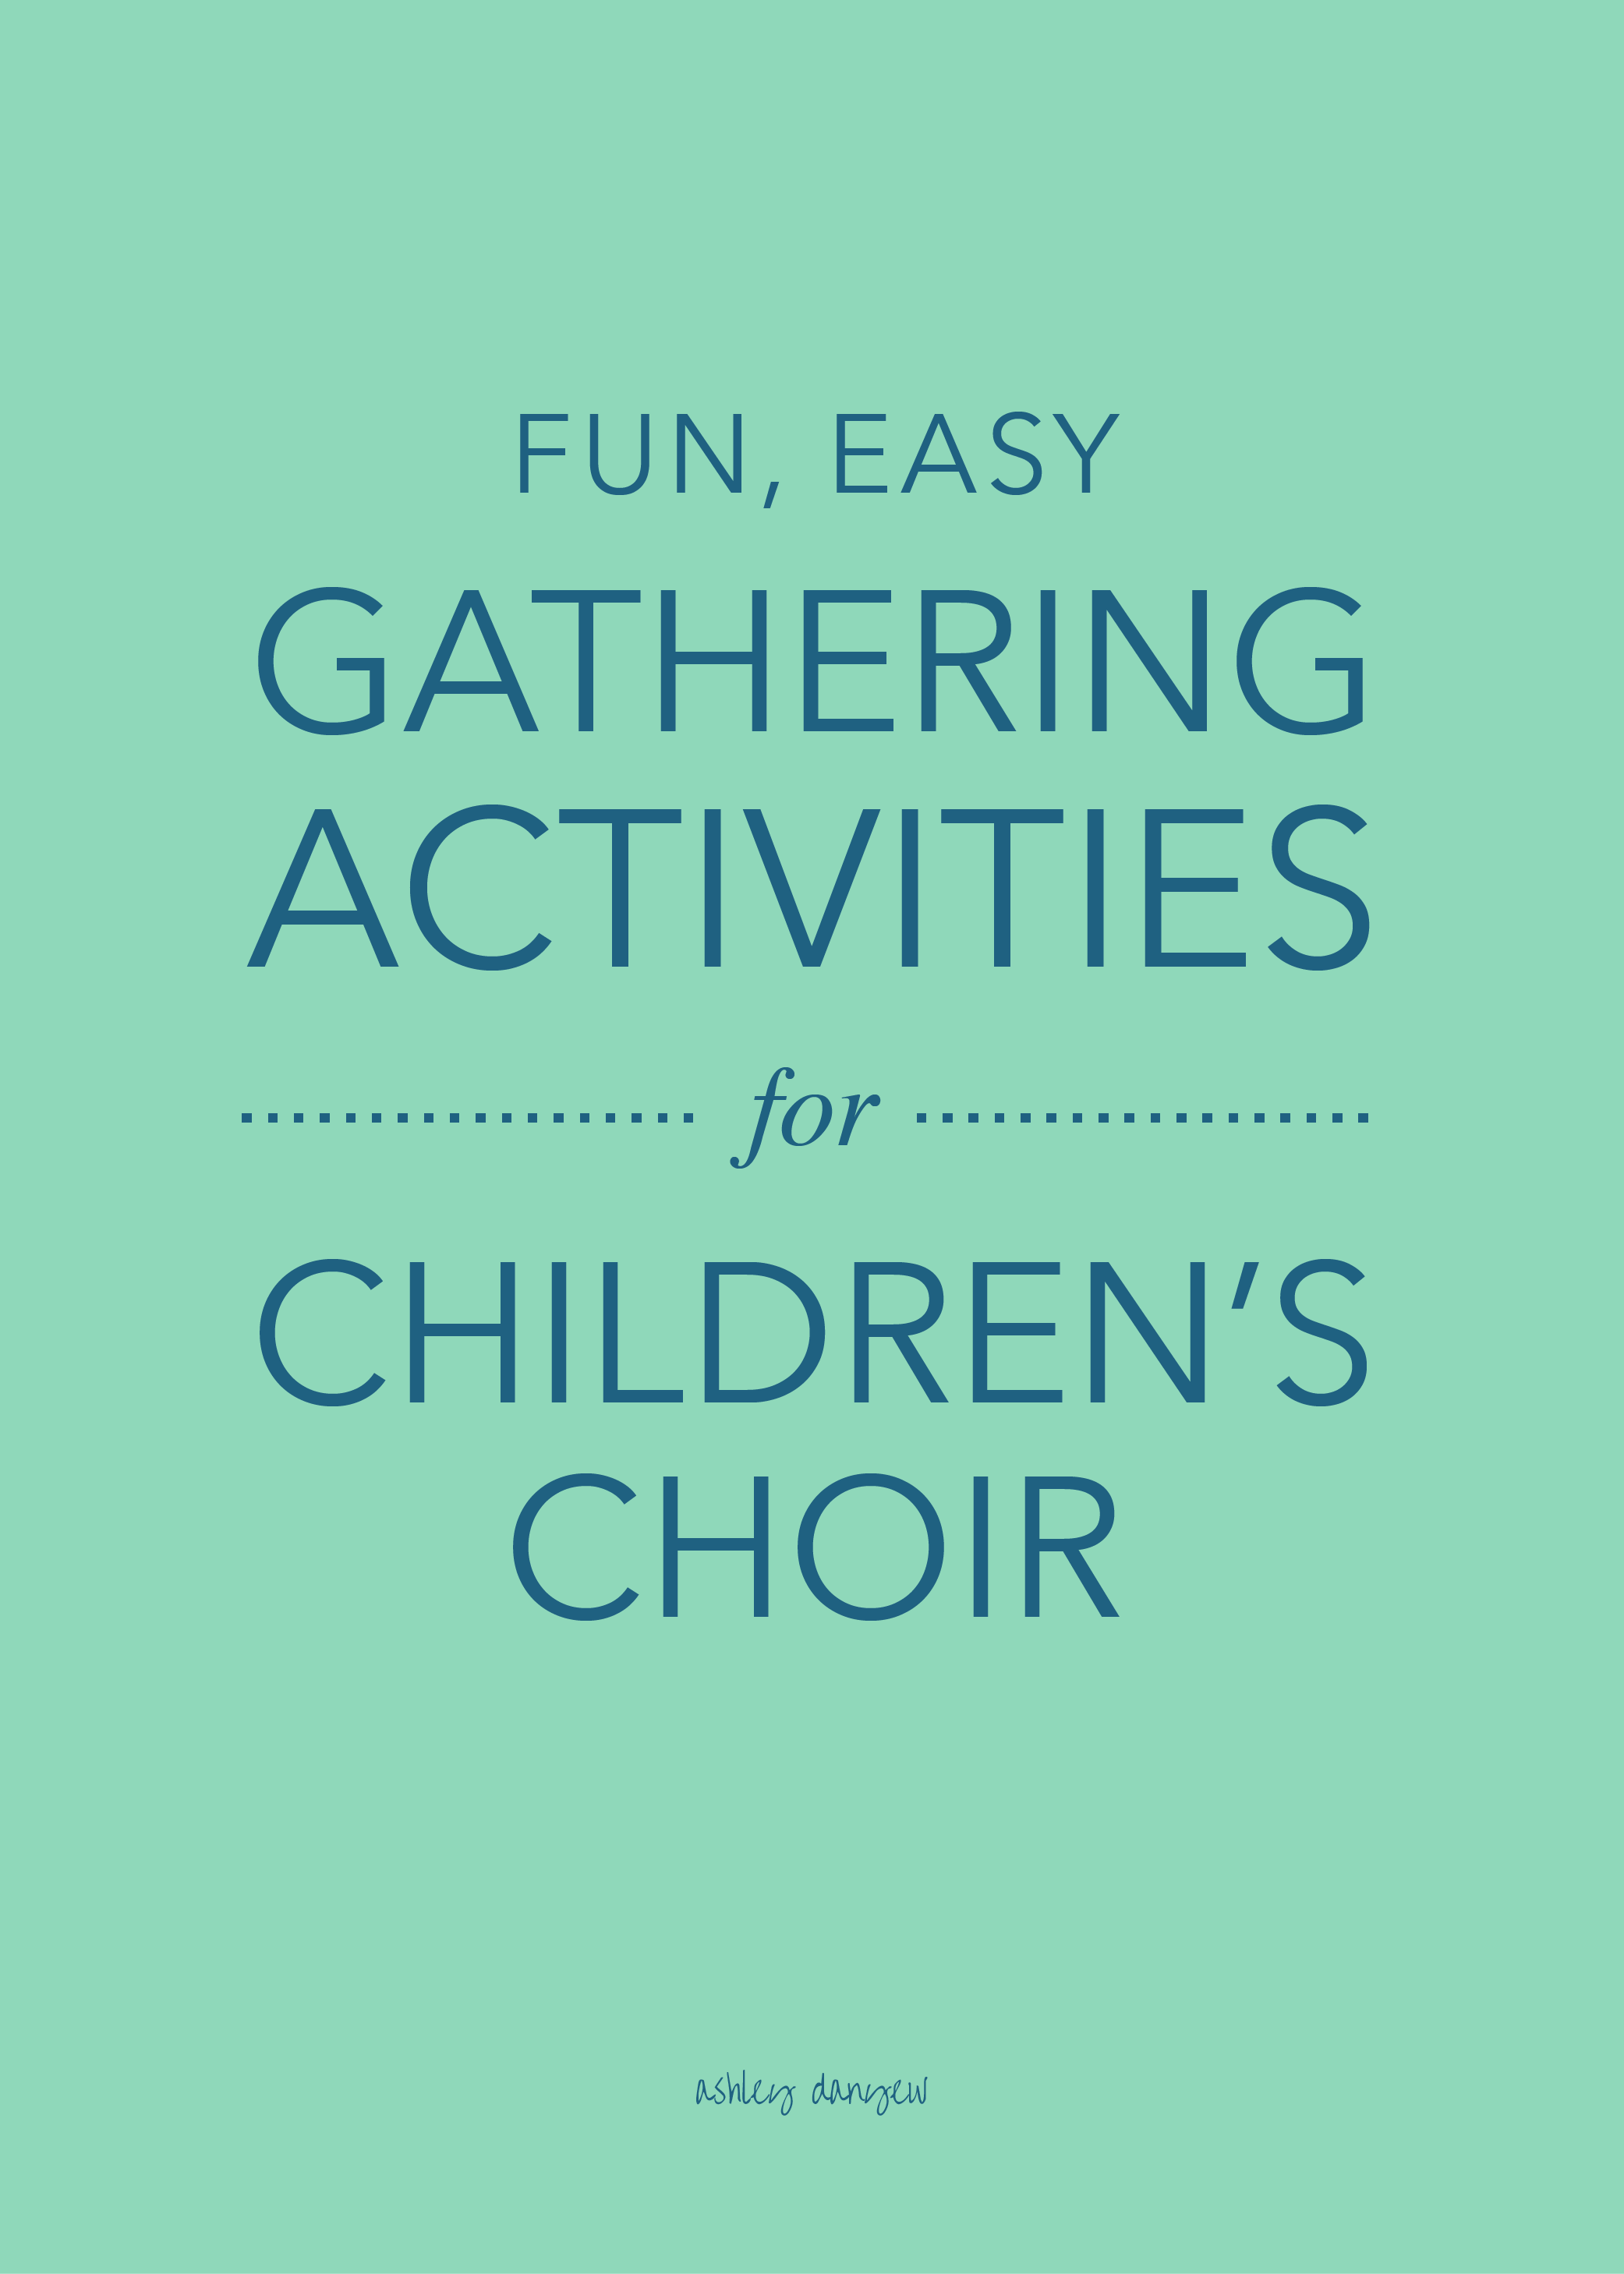 Copy of Fun, Easy Gathering Activities for Children's Choir